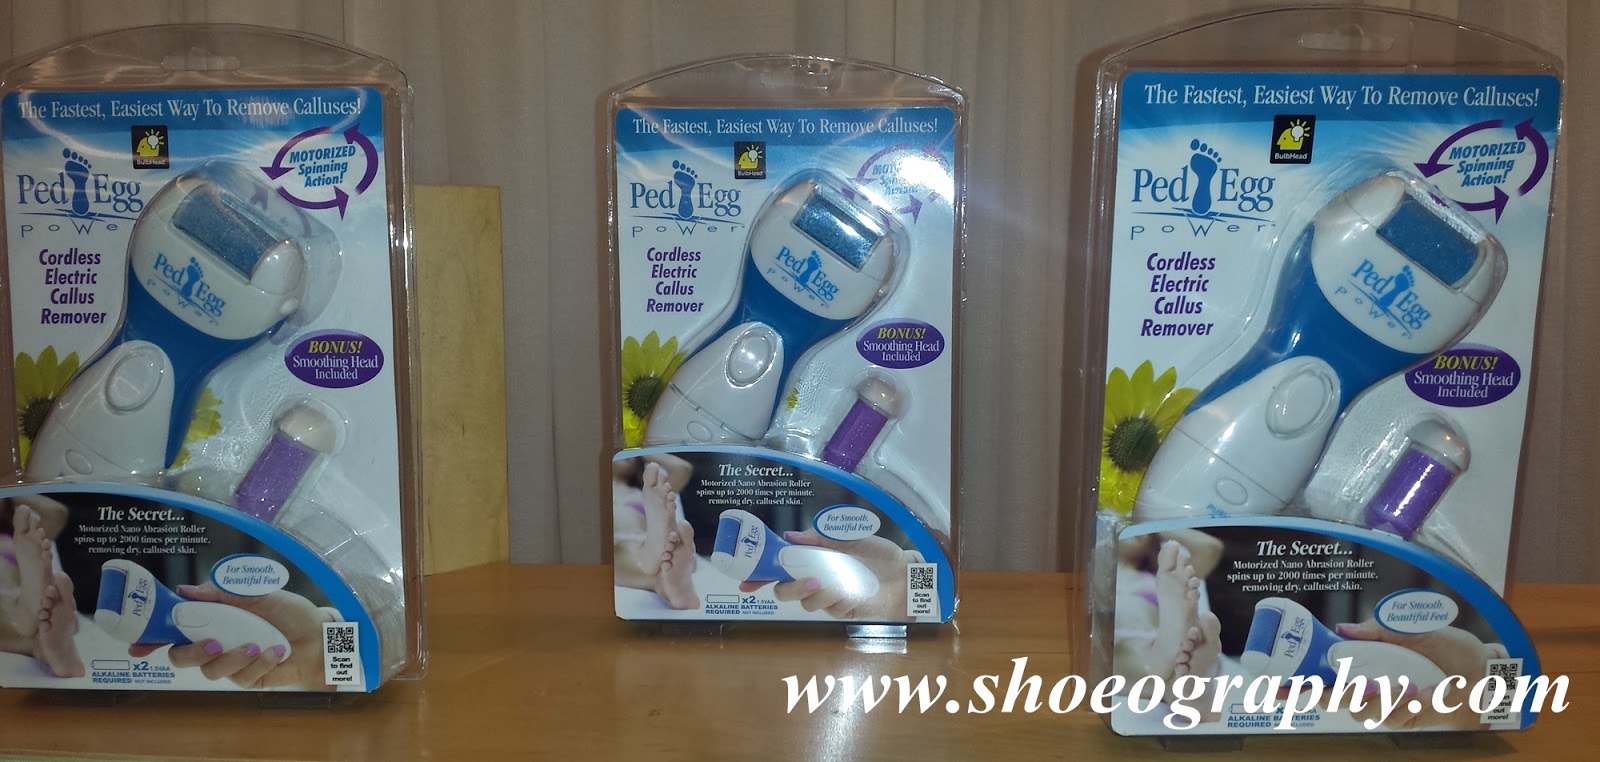 New Ped Egg Cordless Electric Callus Remover AS SEEN ON TV Bonus Smoothing  Head